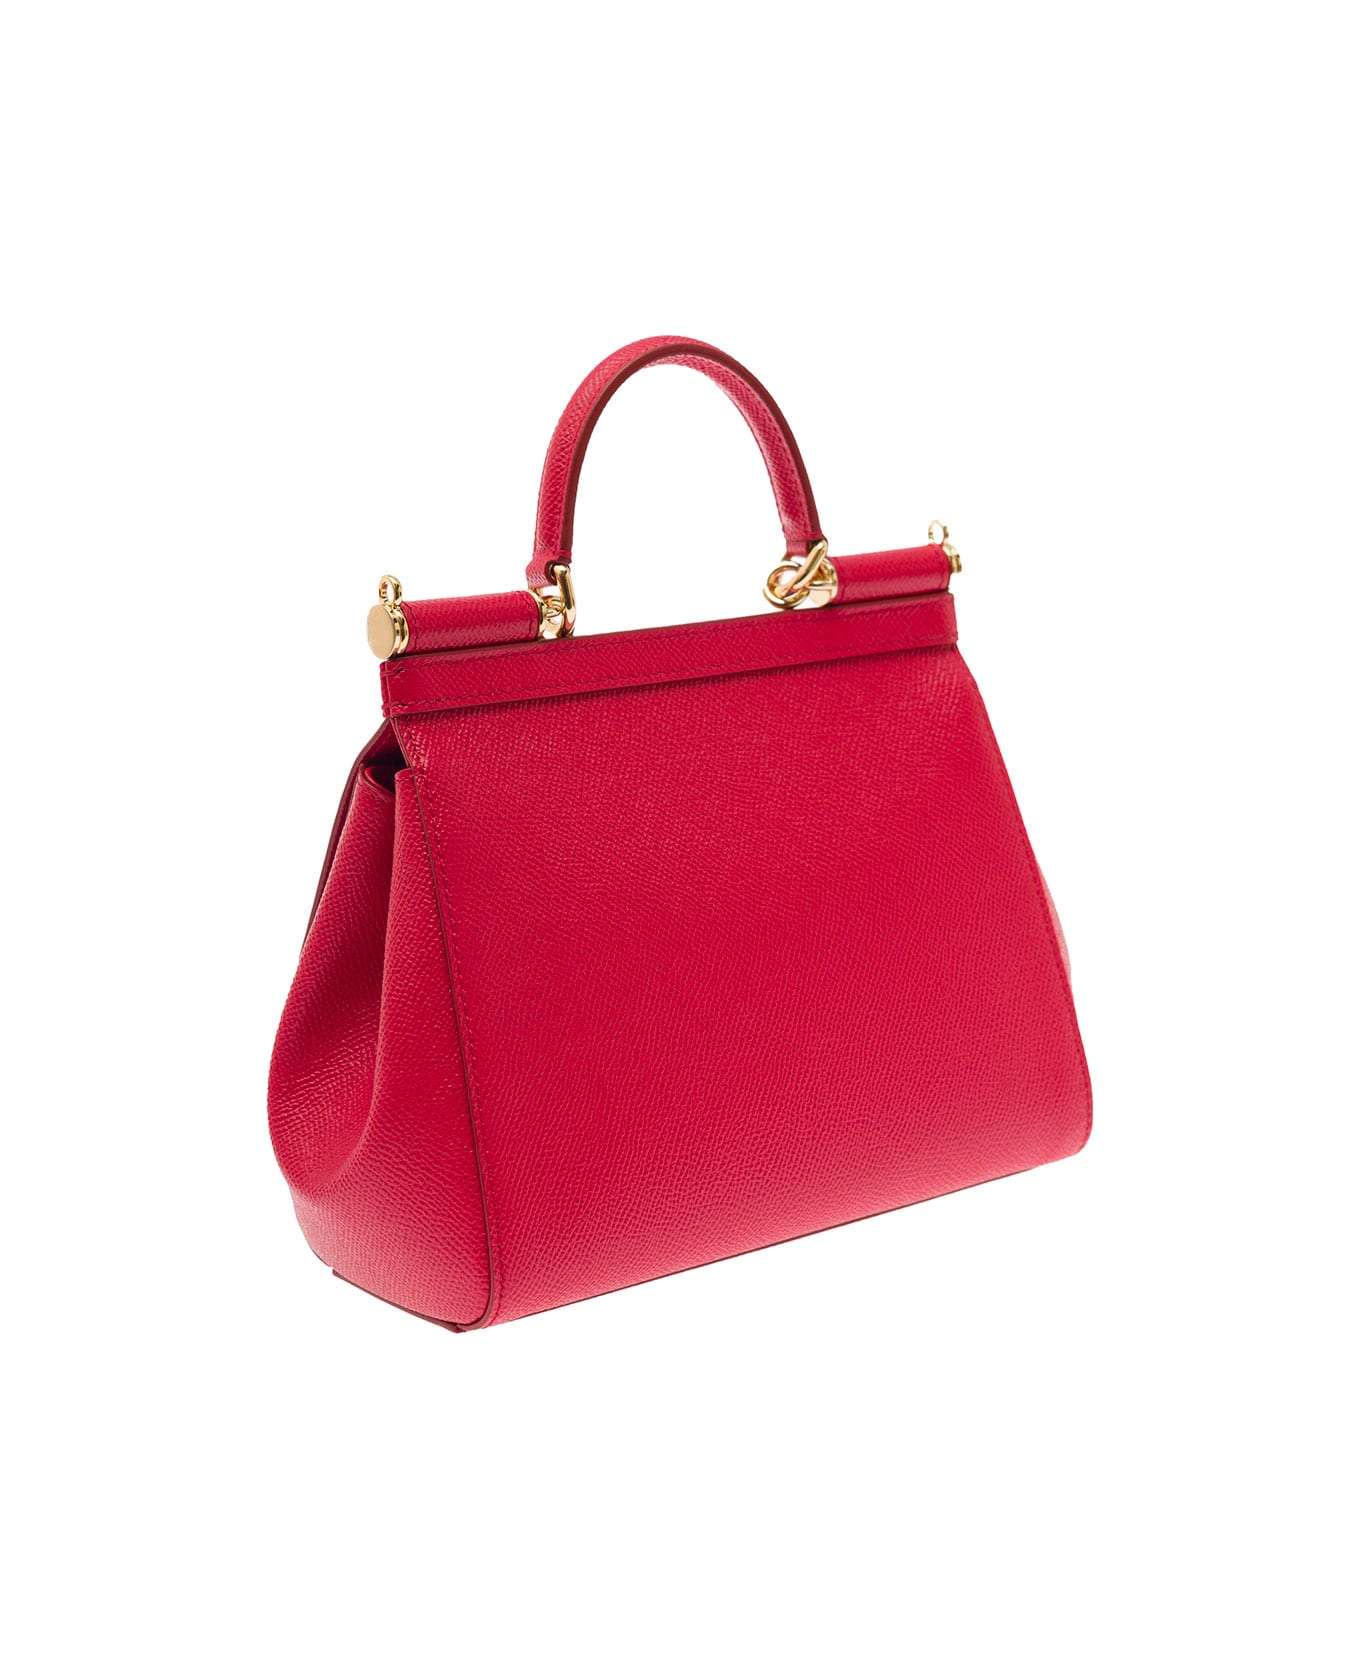 Dolce & Gabbana Sicily Dauphine Handbag In Red Leather Woman - Red トートバッグ